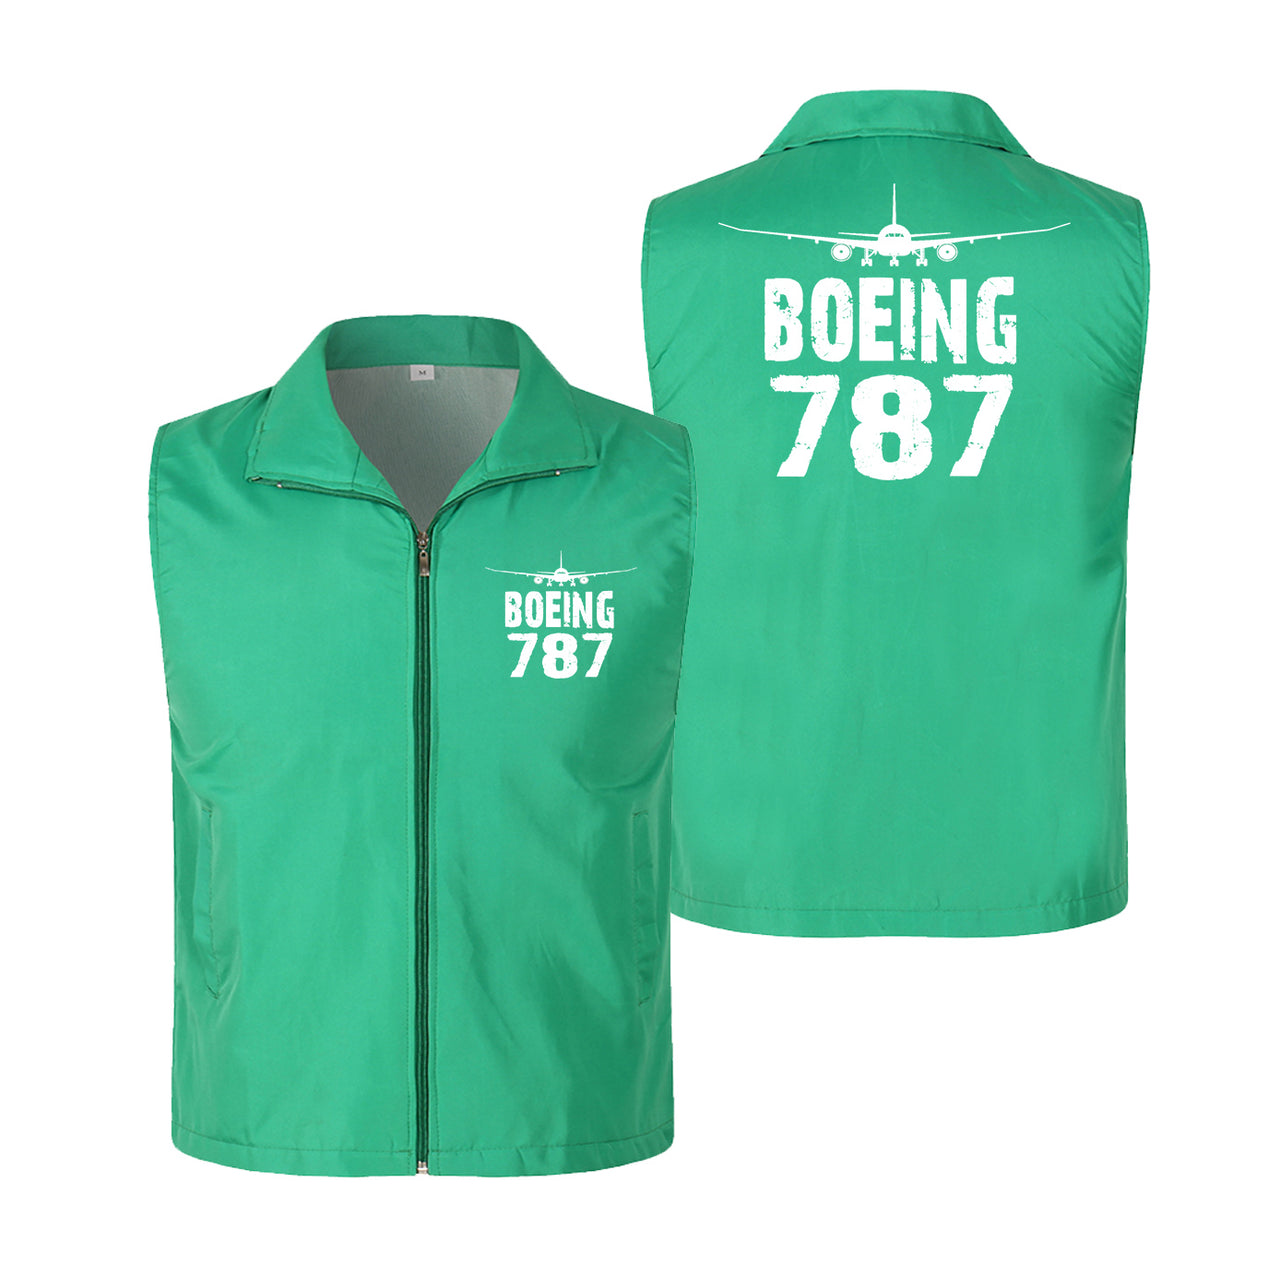 Boeing 787 & Plane Designed Thin Style Vests